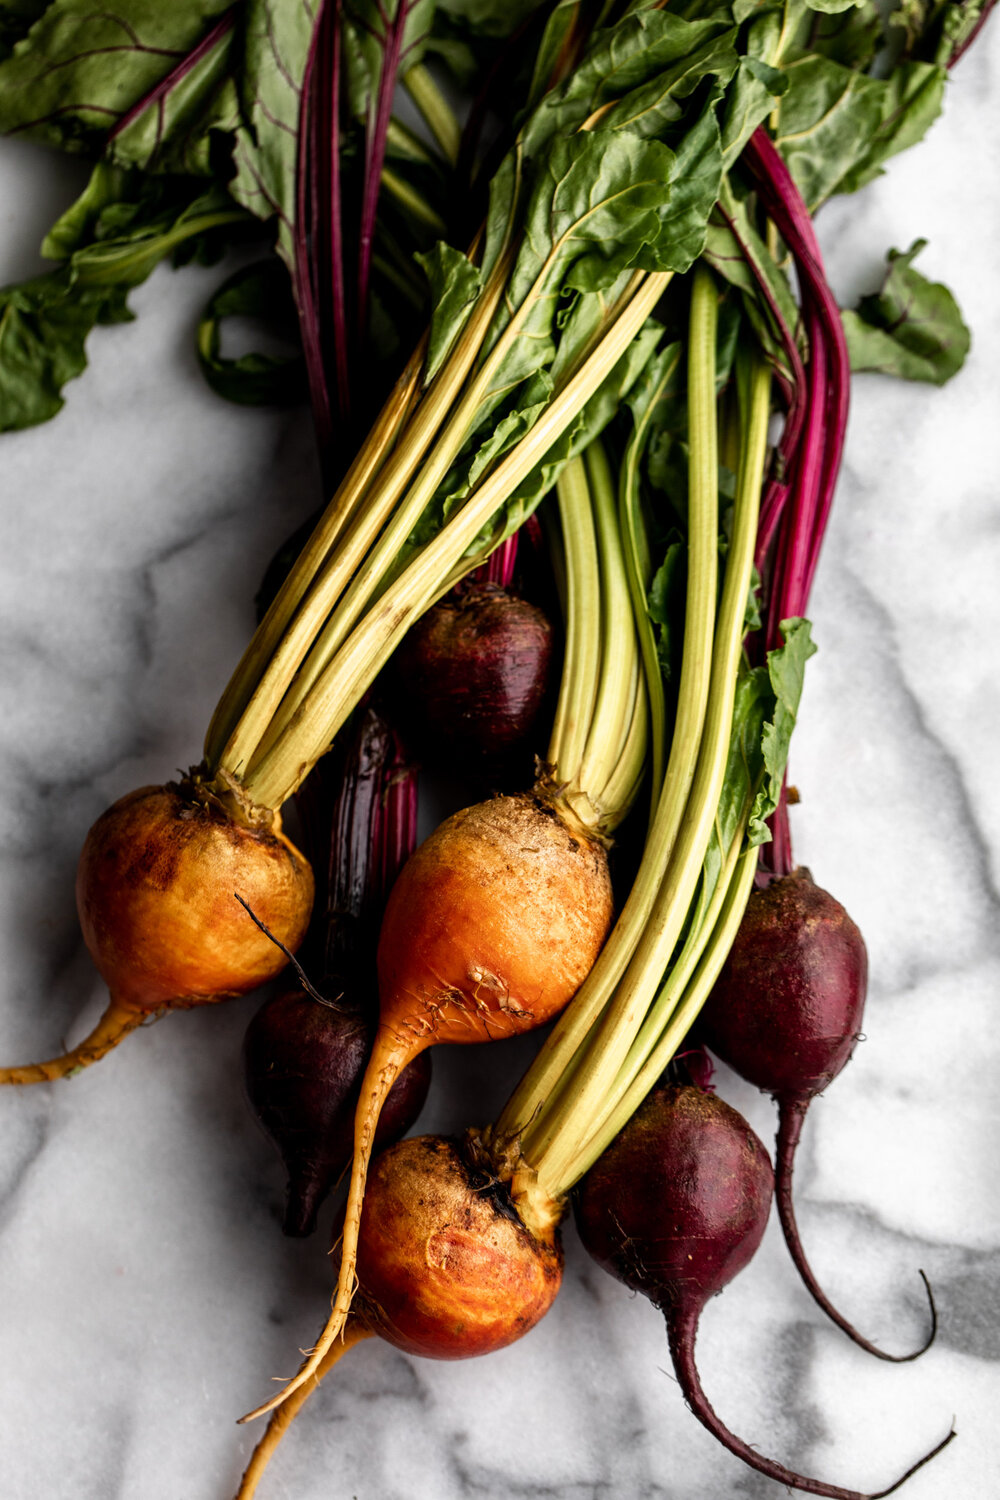 red beets and golden beets with stems